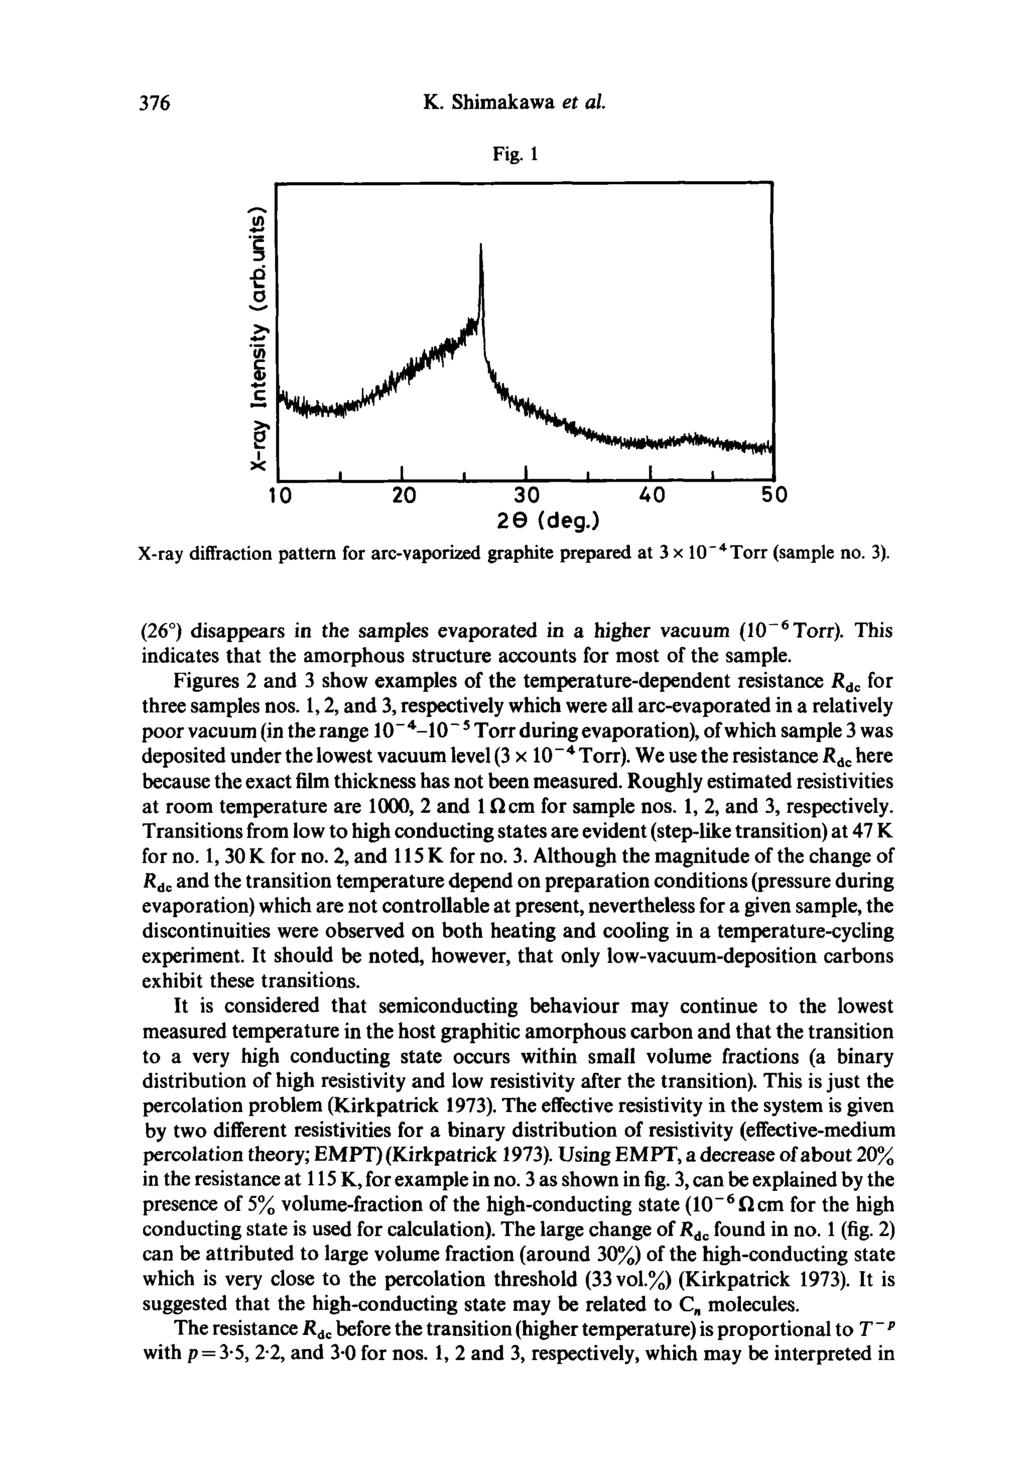 376 K. Shimakawa et al. Fig. 1 X-ray diffraction pattern for arc-vaporized graphite prepared at 3 x 10-4Torr (sample no. 3). (26") disappears in the samples evaporated in a higher vacuum (10-6Torr).